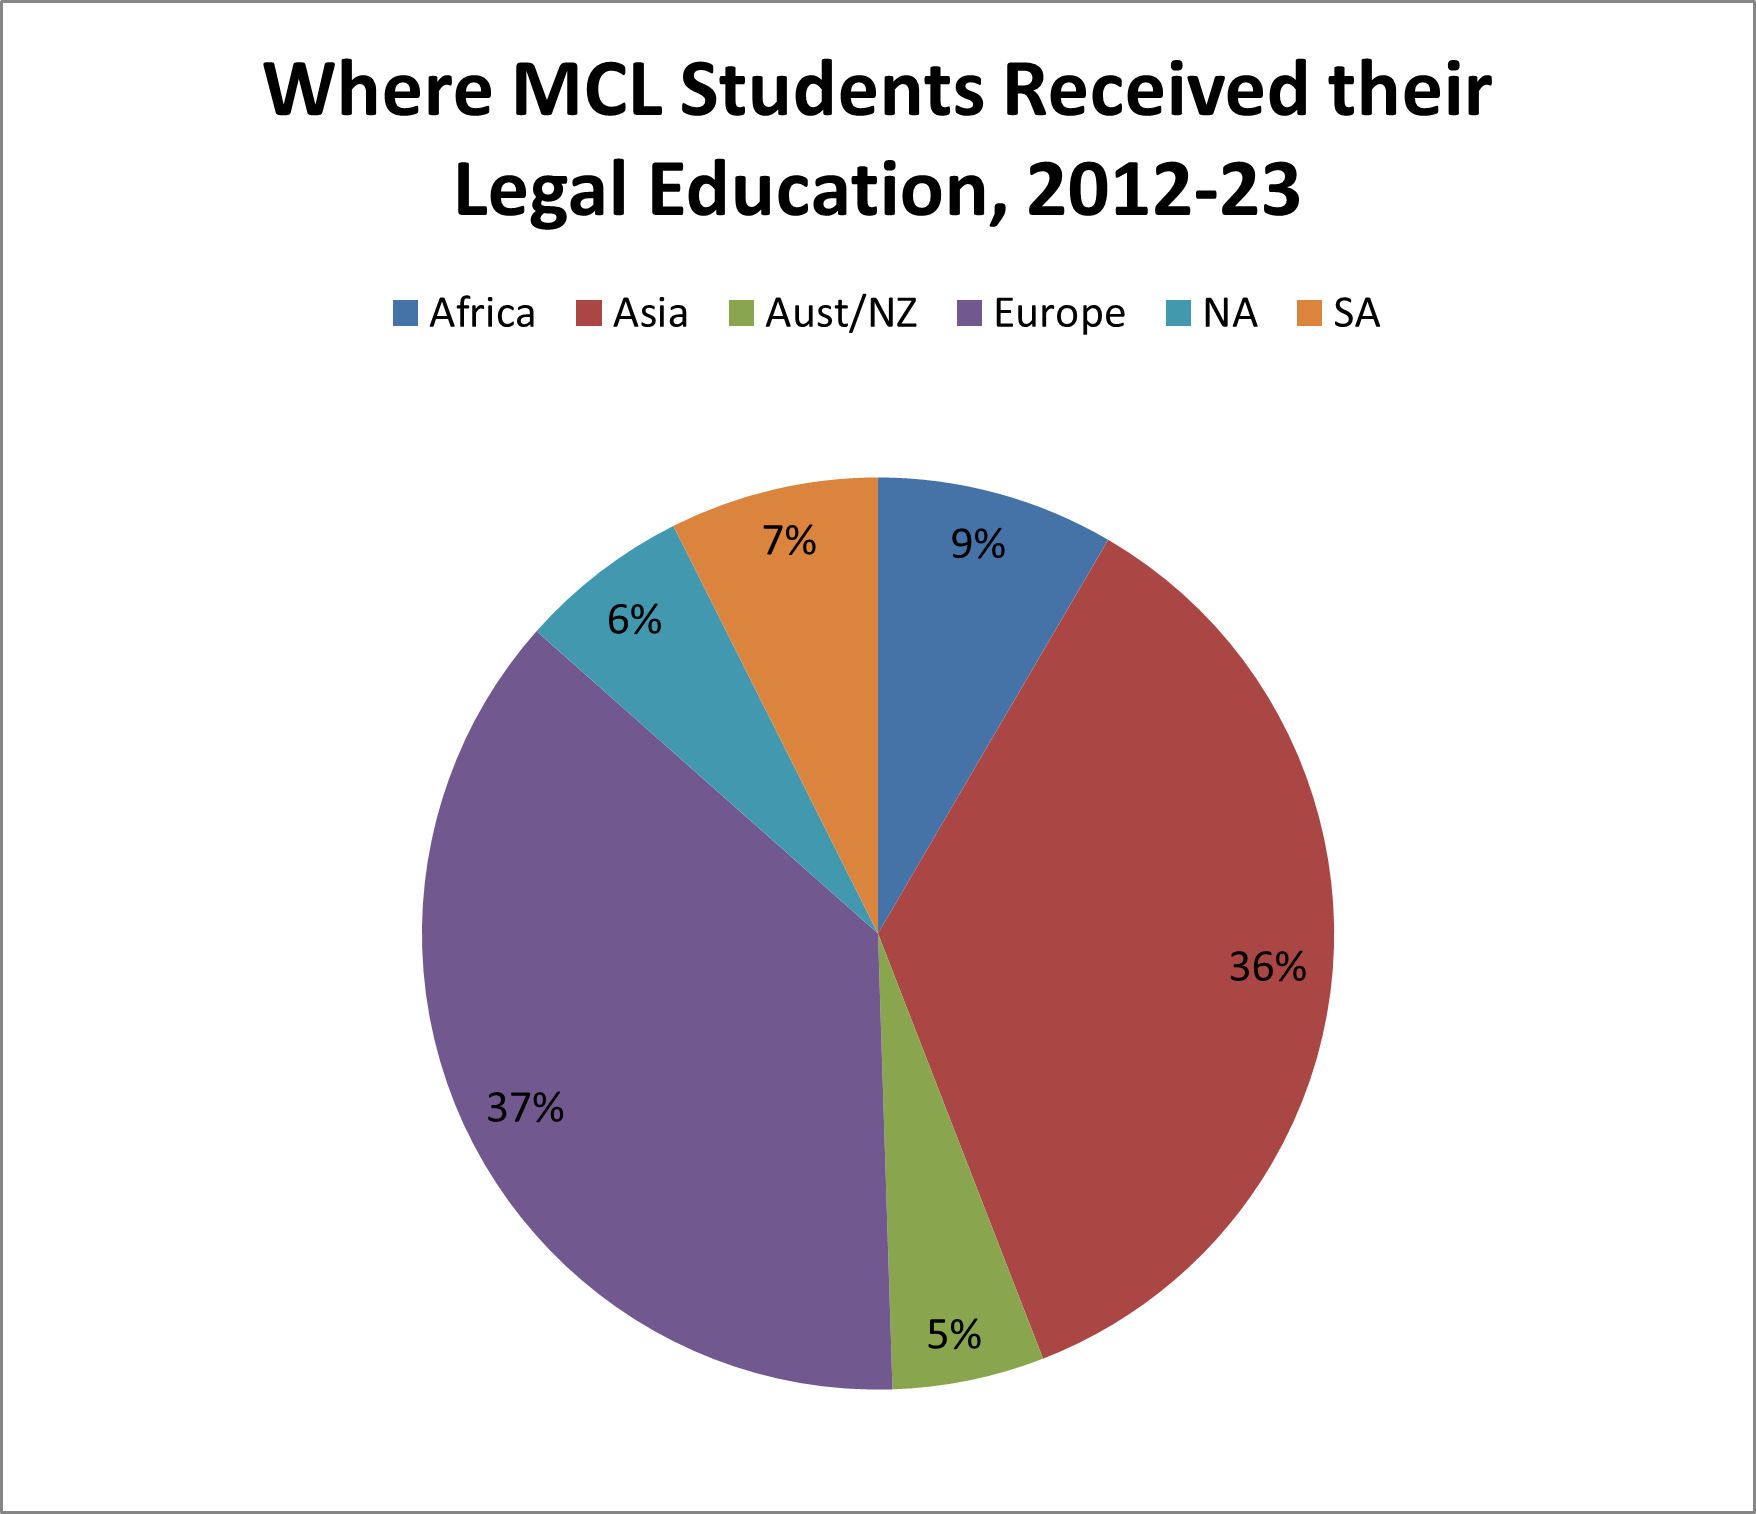 Where MCL students received their education